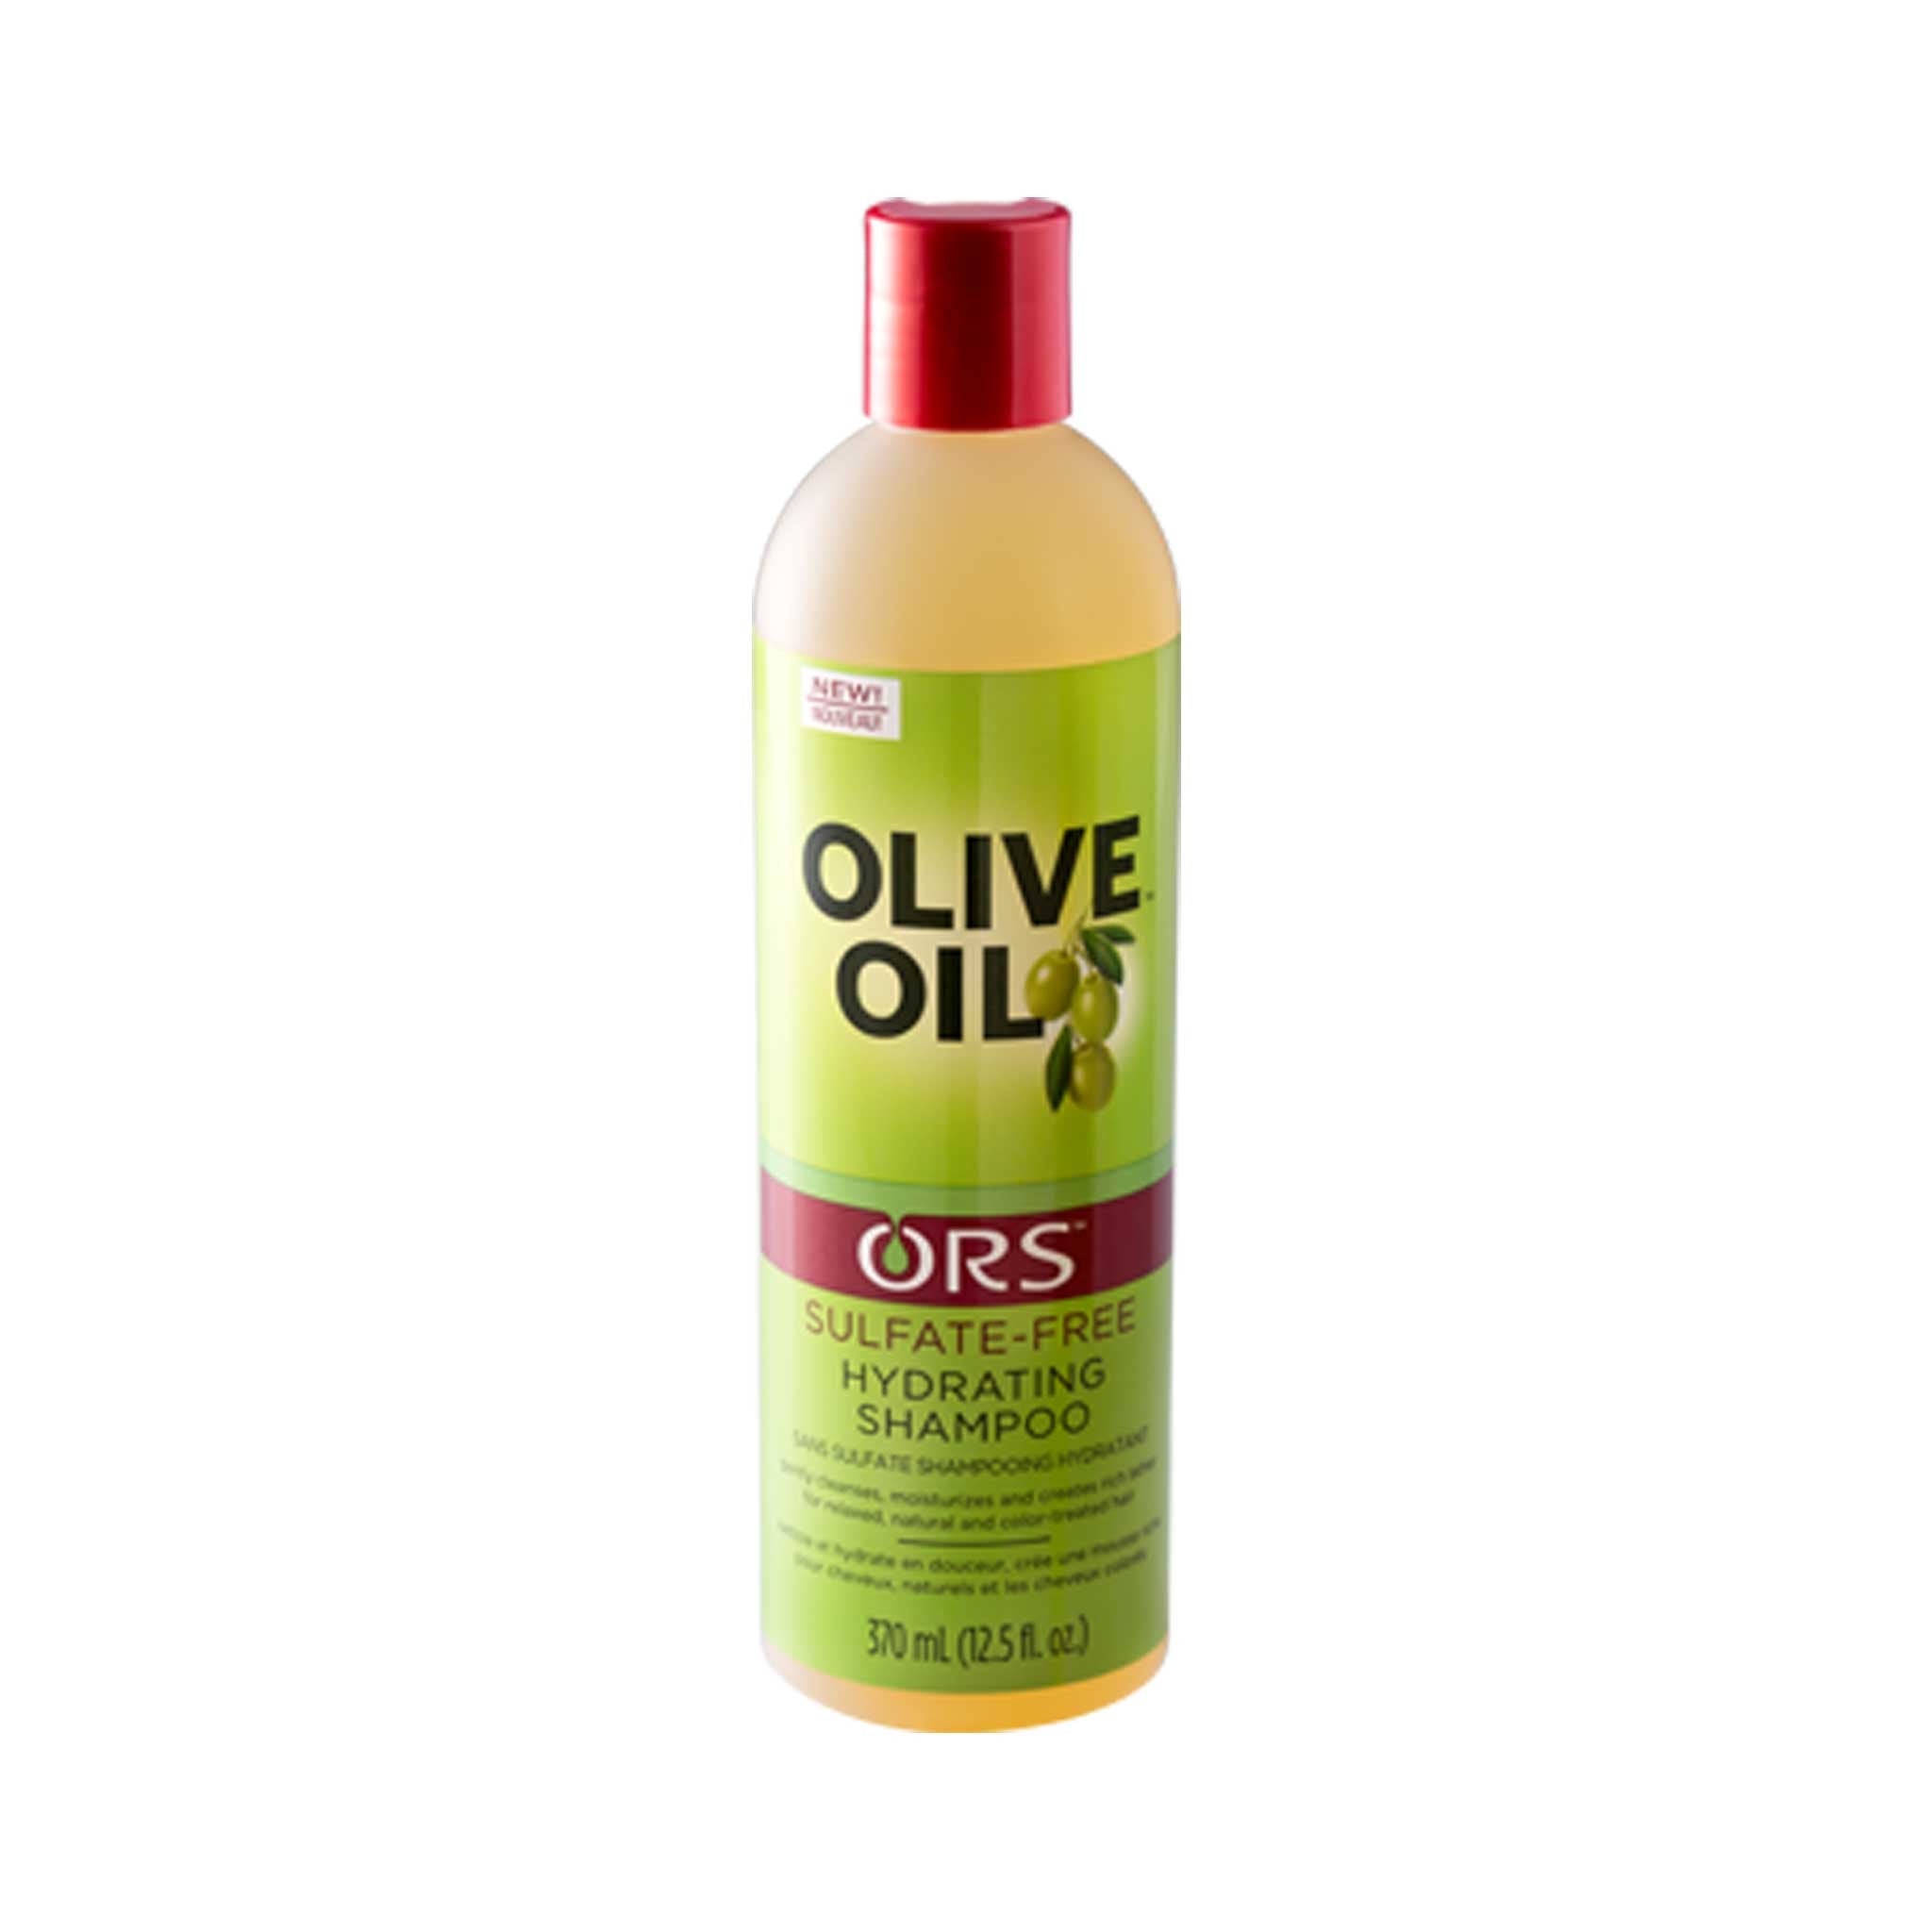 ORS Sulfate-Free Hydrating Shampoo